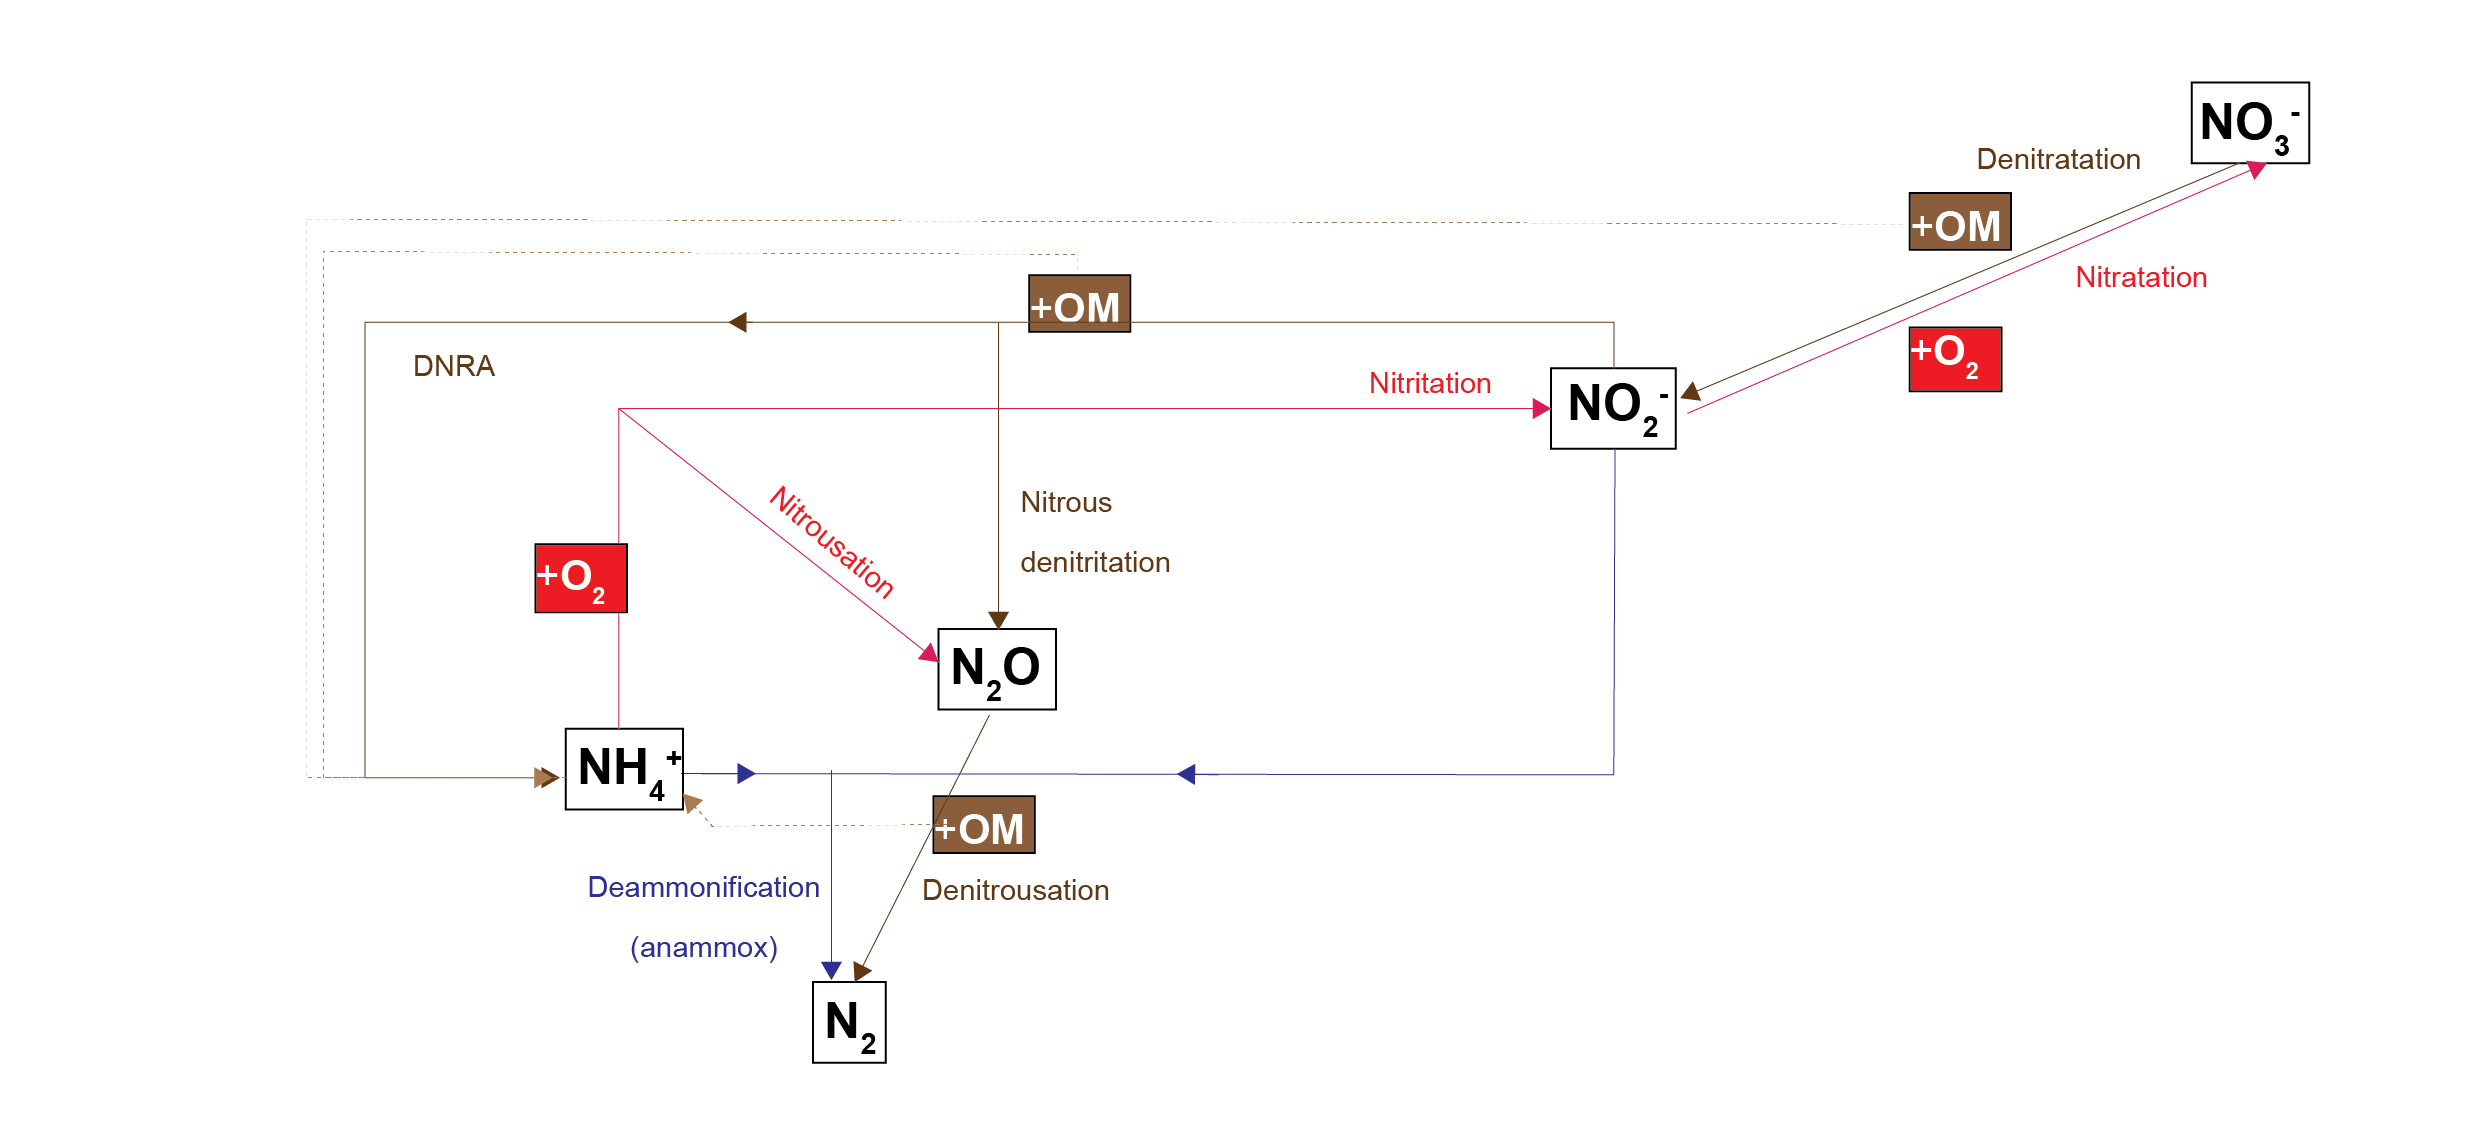 Schematic of the nitrogen redox reactions used in this sediment model. Brown pathways are the oxidation of organic matter by nitrogen species; red pathways are oxidation of nitrogen species by oxygen; the blue pathway is the oxidation of one nitrogen species by another.